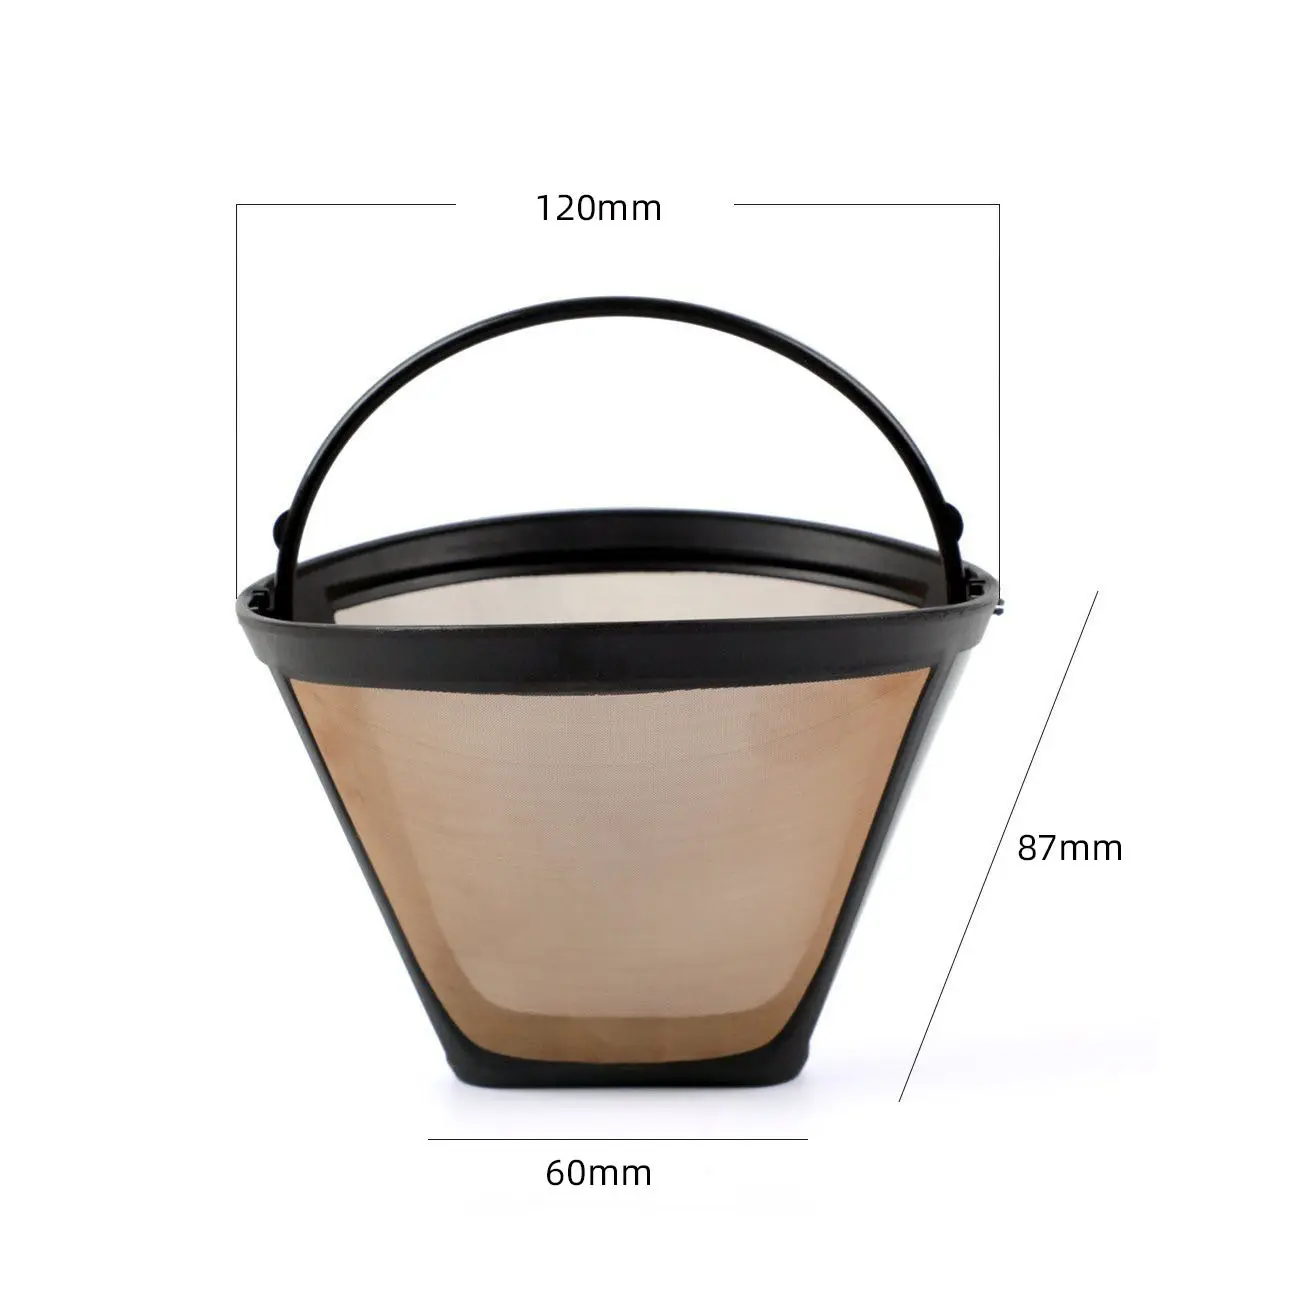 Portable Coffee Filter Foldable Drip Coffee Tea Holder Funnel Baskets Reusable Paperless Pour Over Stand Coffee Dripper Strainer